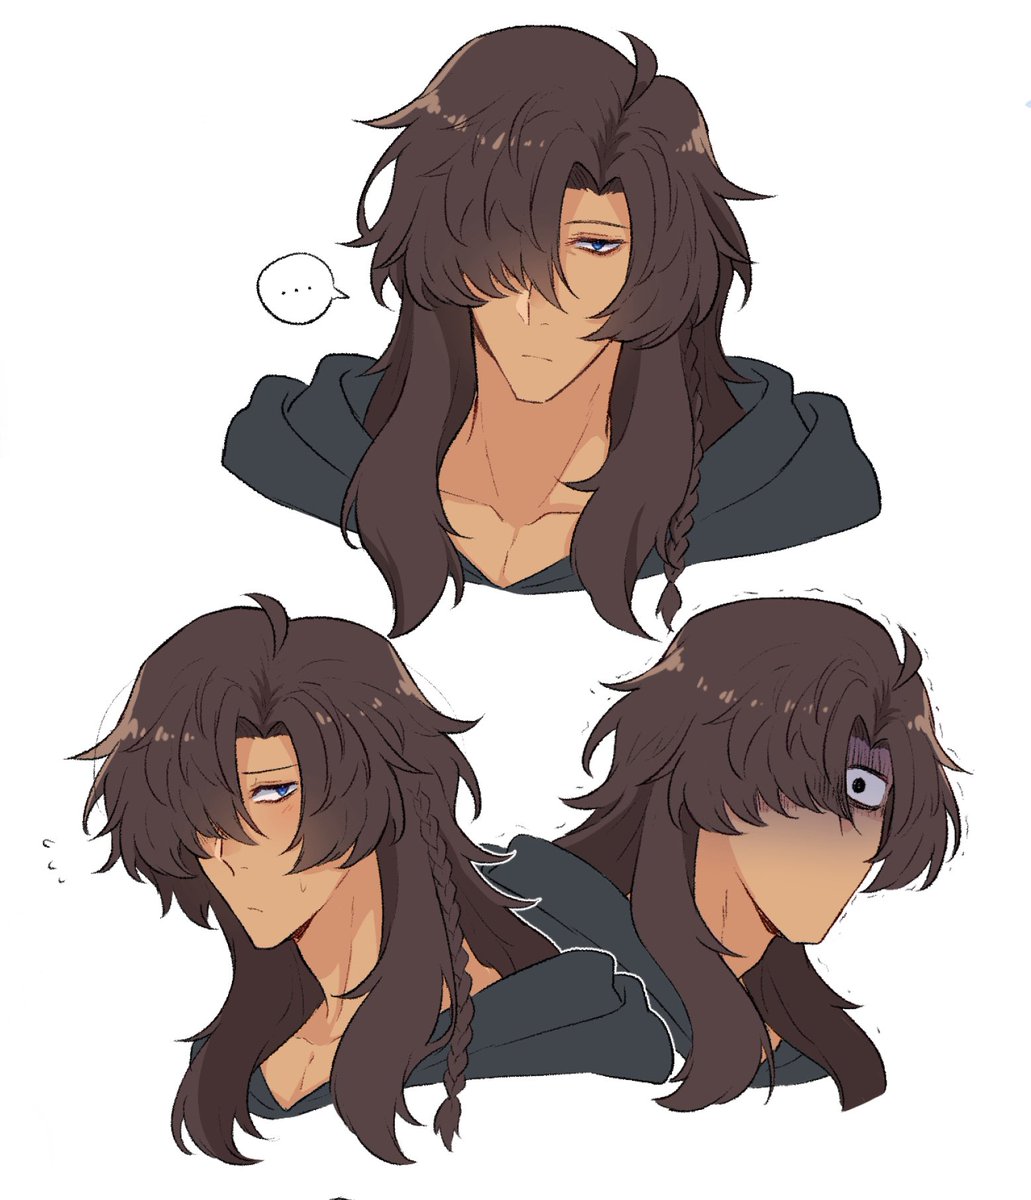 「some leon expressions i drew a while bac」|aly 🐾 temi plush is REALのイラスト